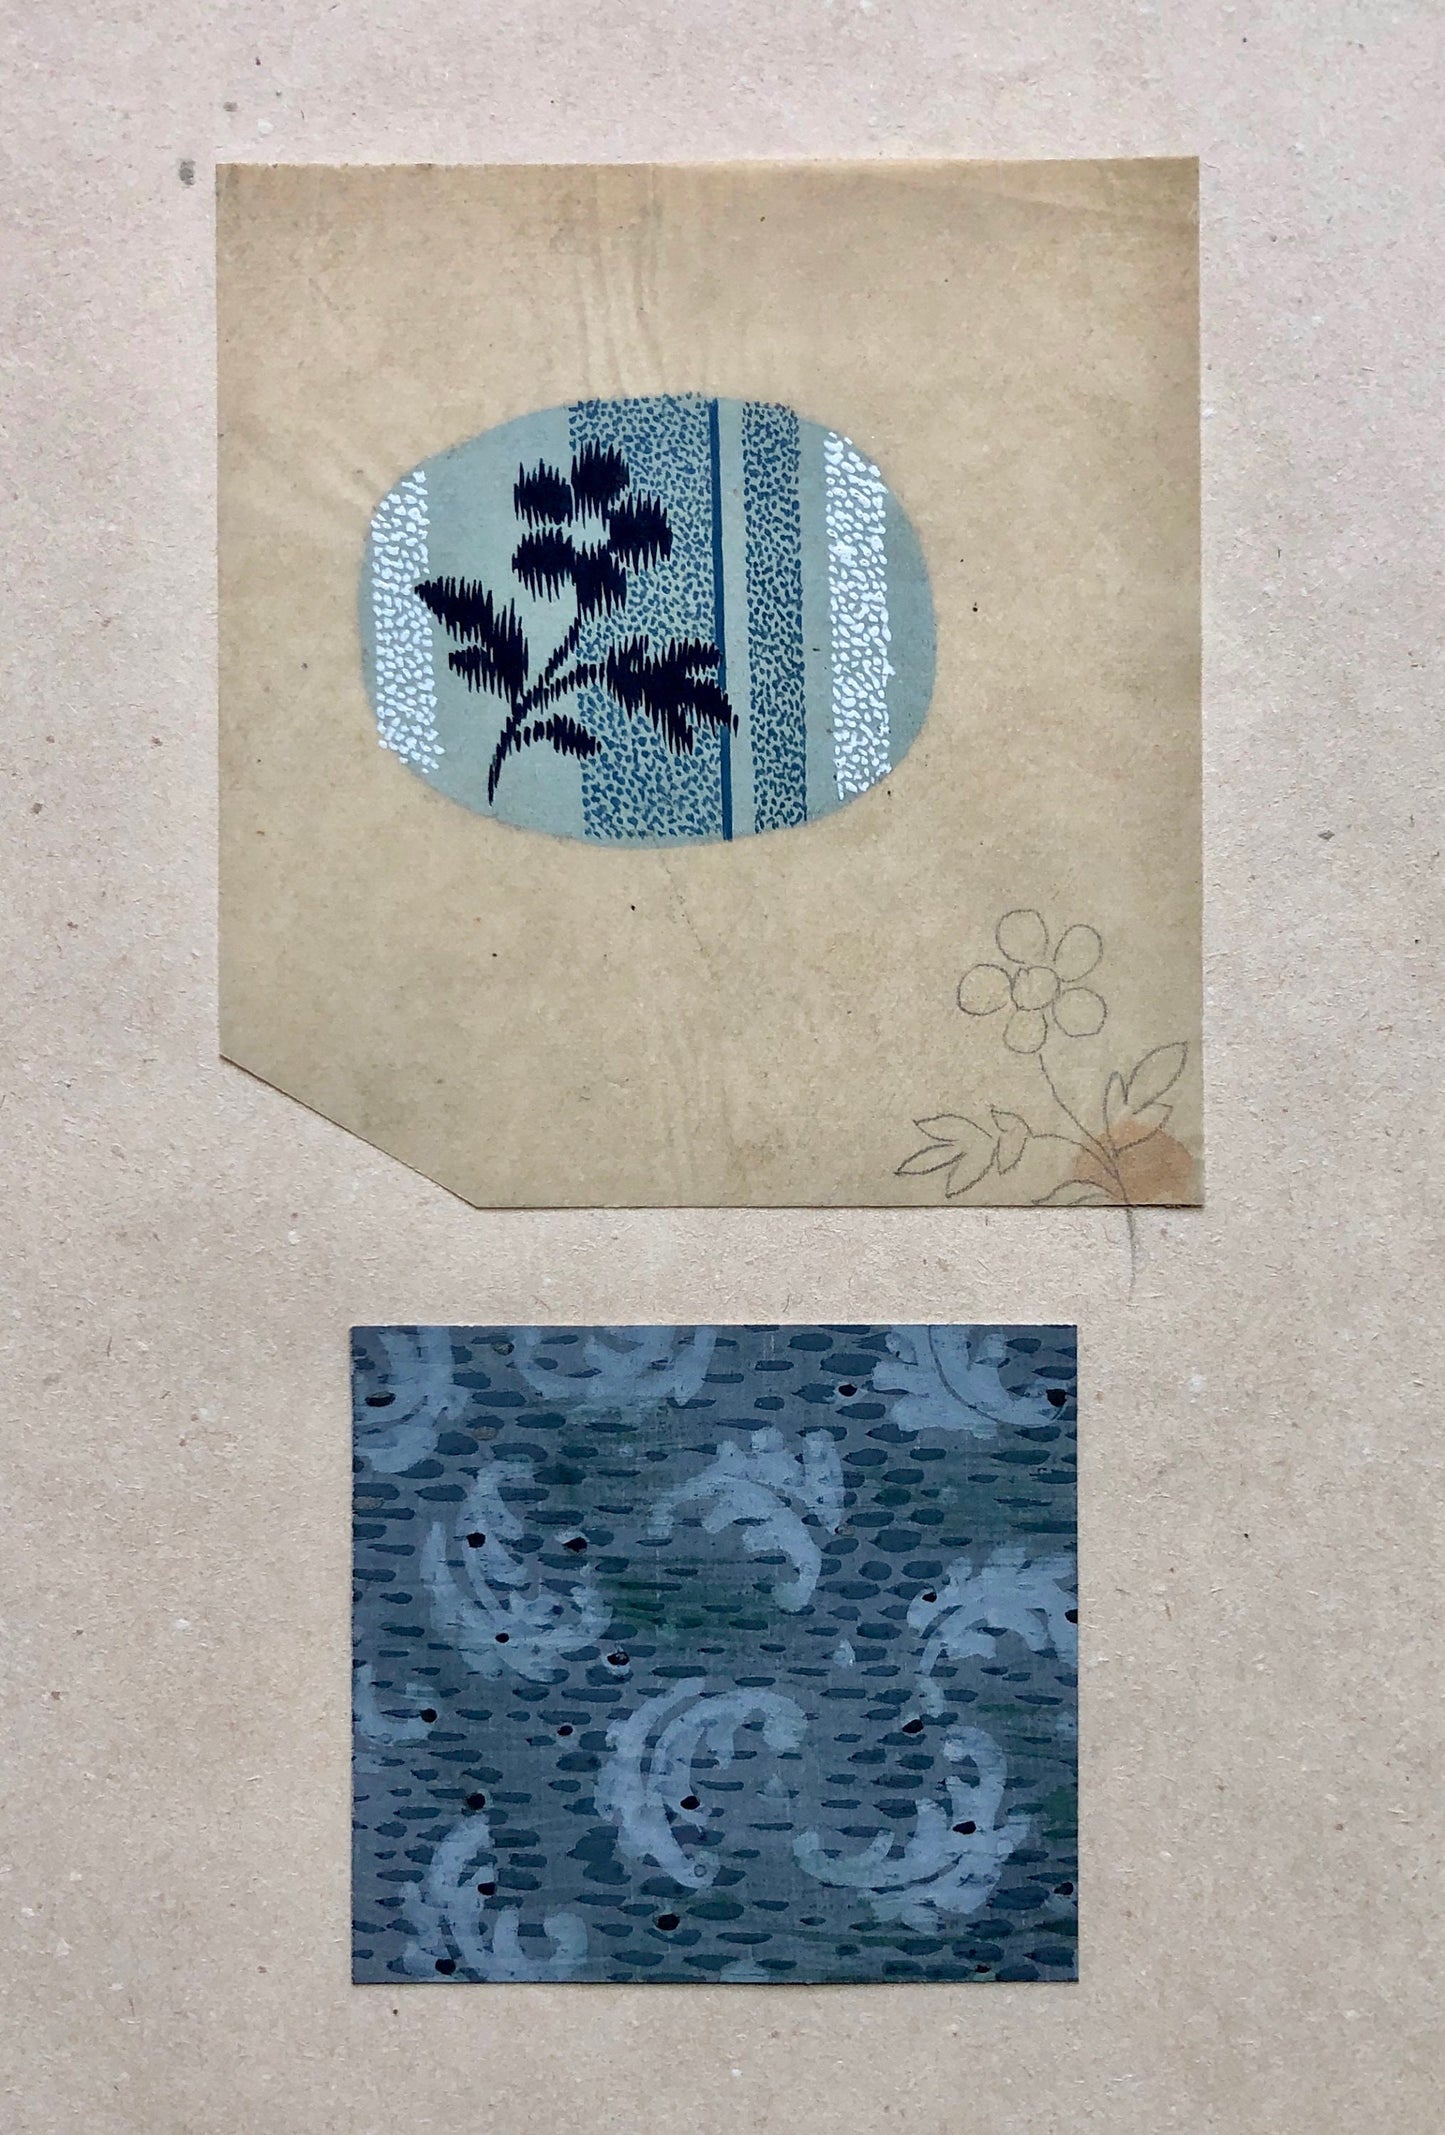 Two Original French Textile Designs From The Early 1900’s. Hand Painted. Produced in Lyon and Rouen. 8.5 x 9 cms and 5.5 x 6 cms.